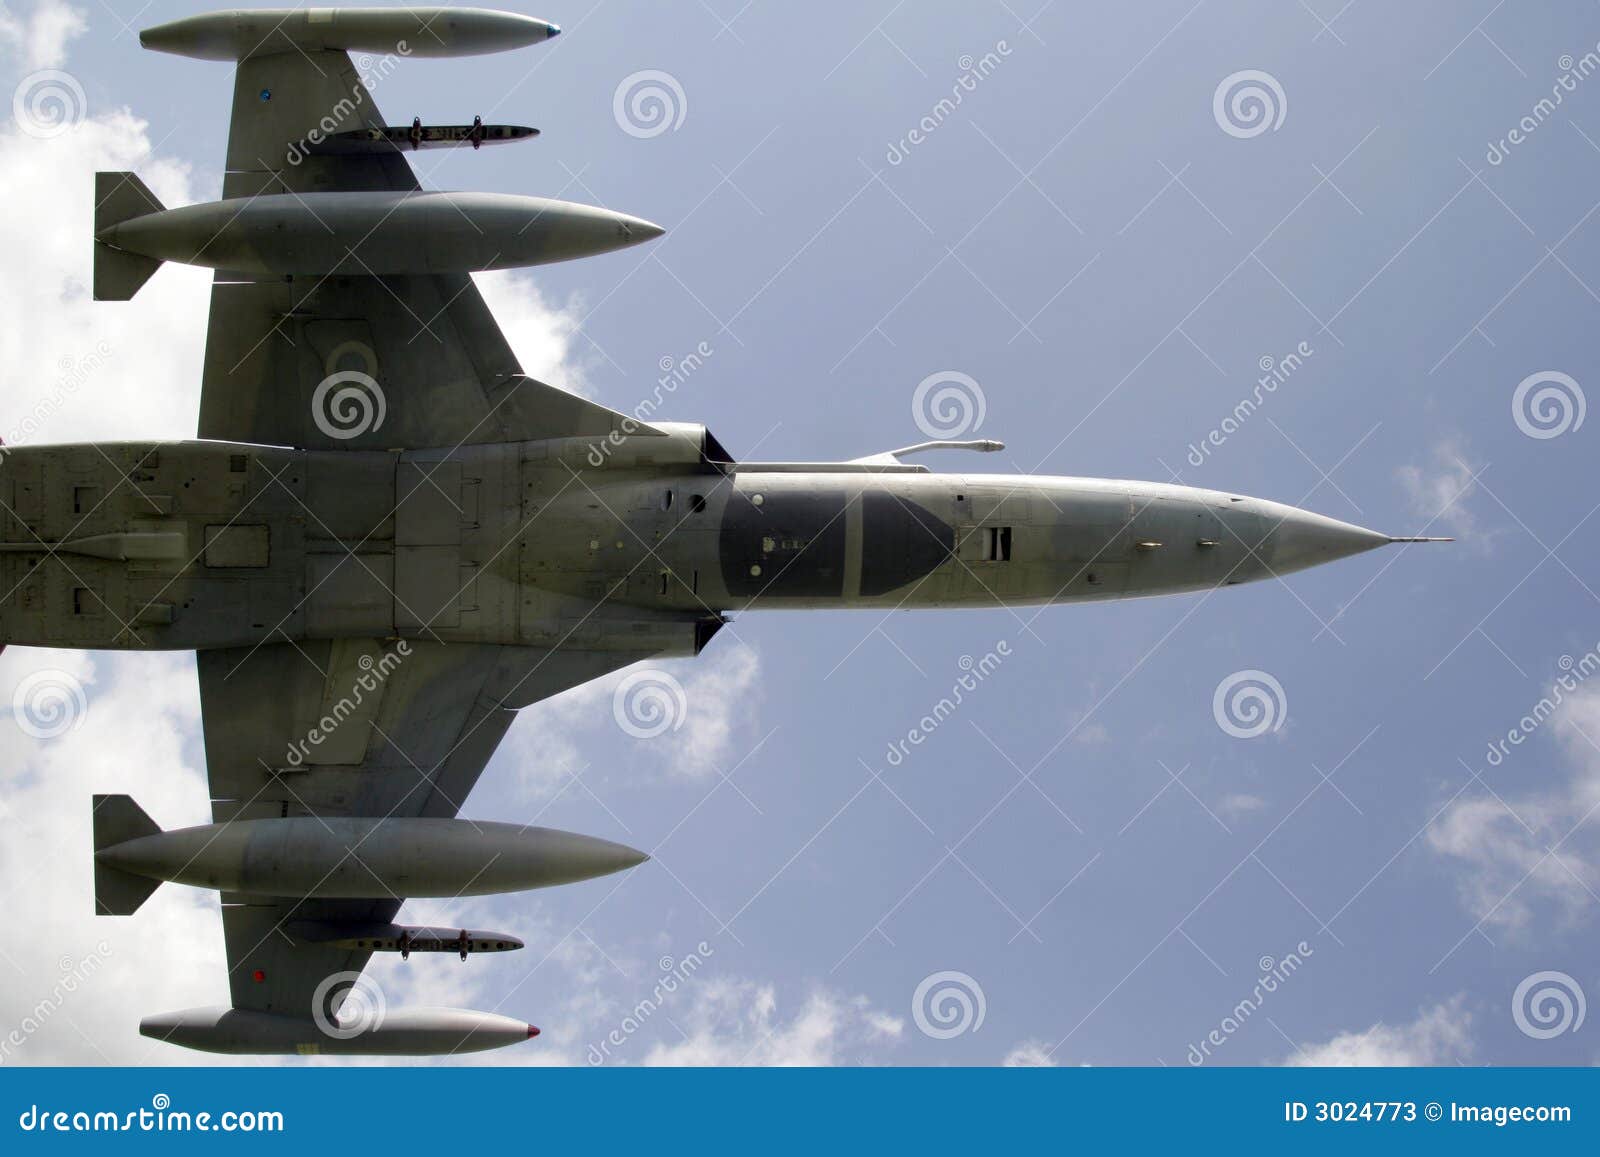 F5 jet aircraft in flight stock image. Image of bombs ...